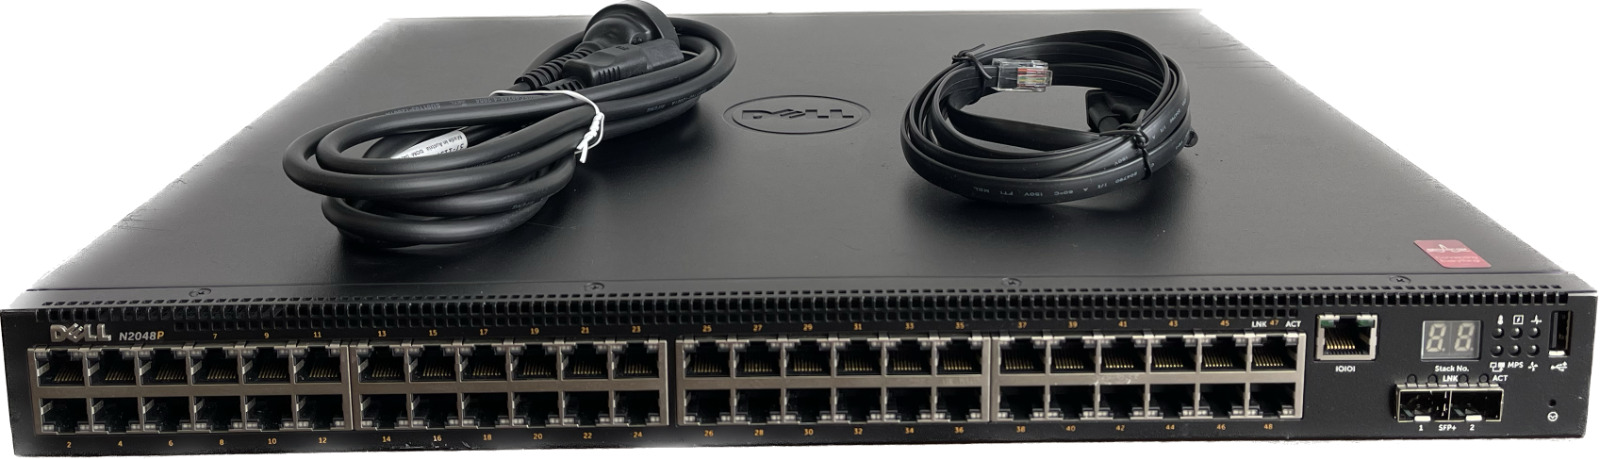 Dell Networking N2048P 48-Port PoE+ Managed Gigabit Ethernet Network Switch